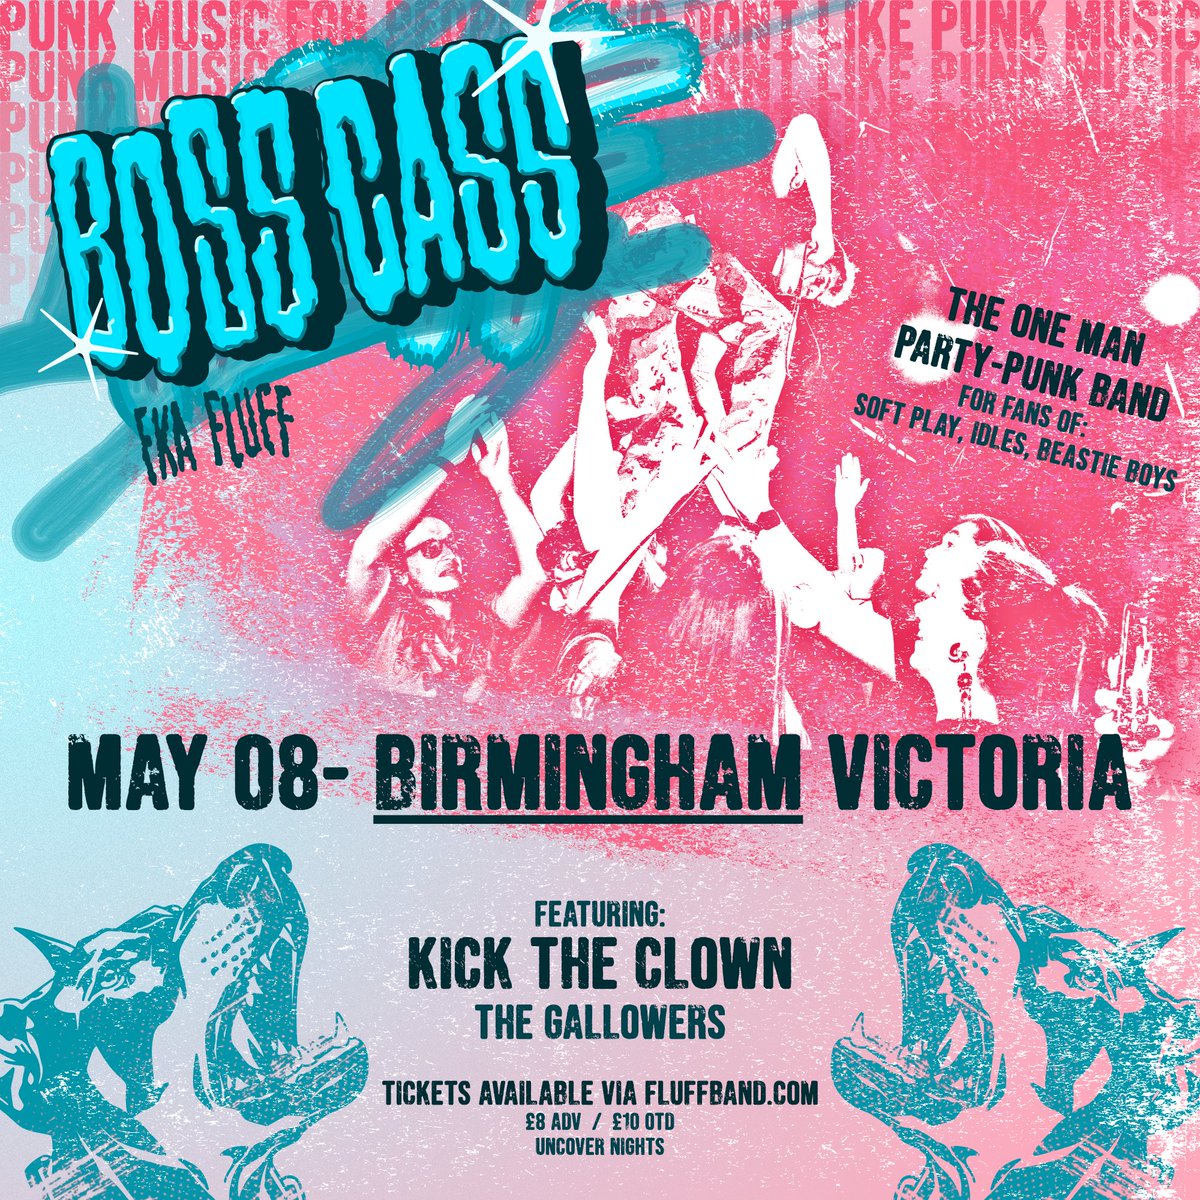 ONE WEEK TO GO 💙 One man punk band @bosscassuk (FKA Fluff) headlines @TheVictoria, Birmingham, on Wednesday, 8th May, with special guests Kick The Clown and The Gallowers 💥 Tickets on sale now: bit.ly/49PZc8A